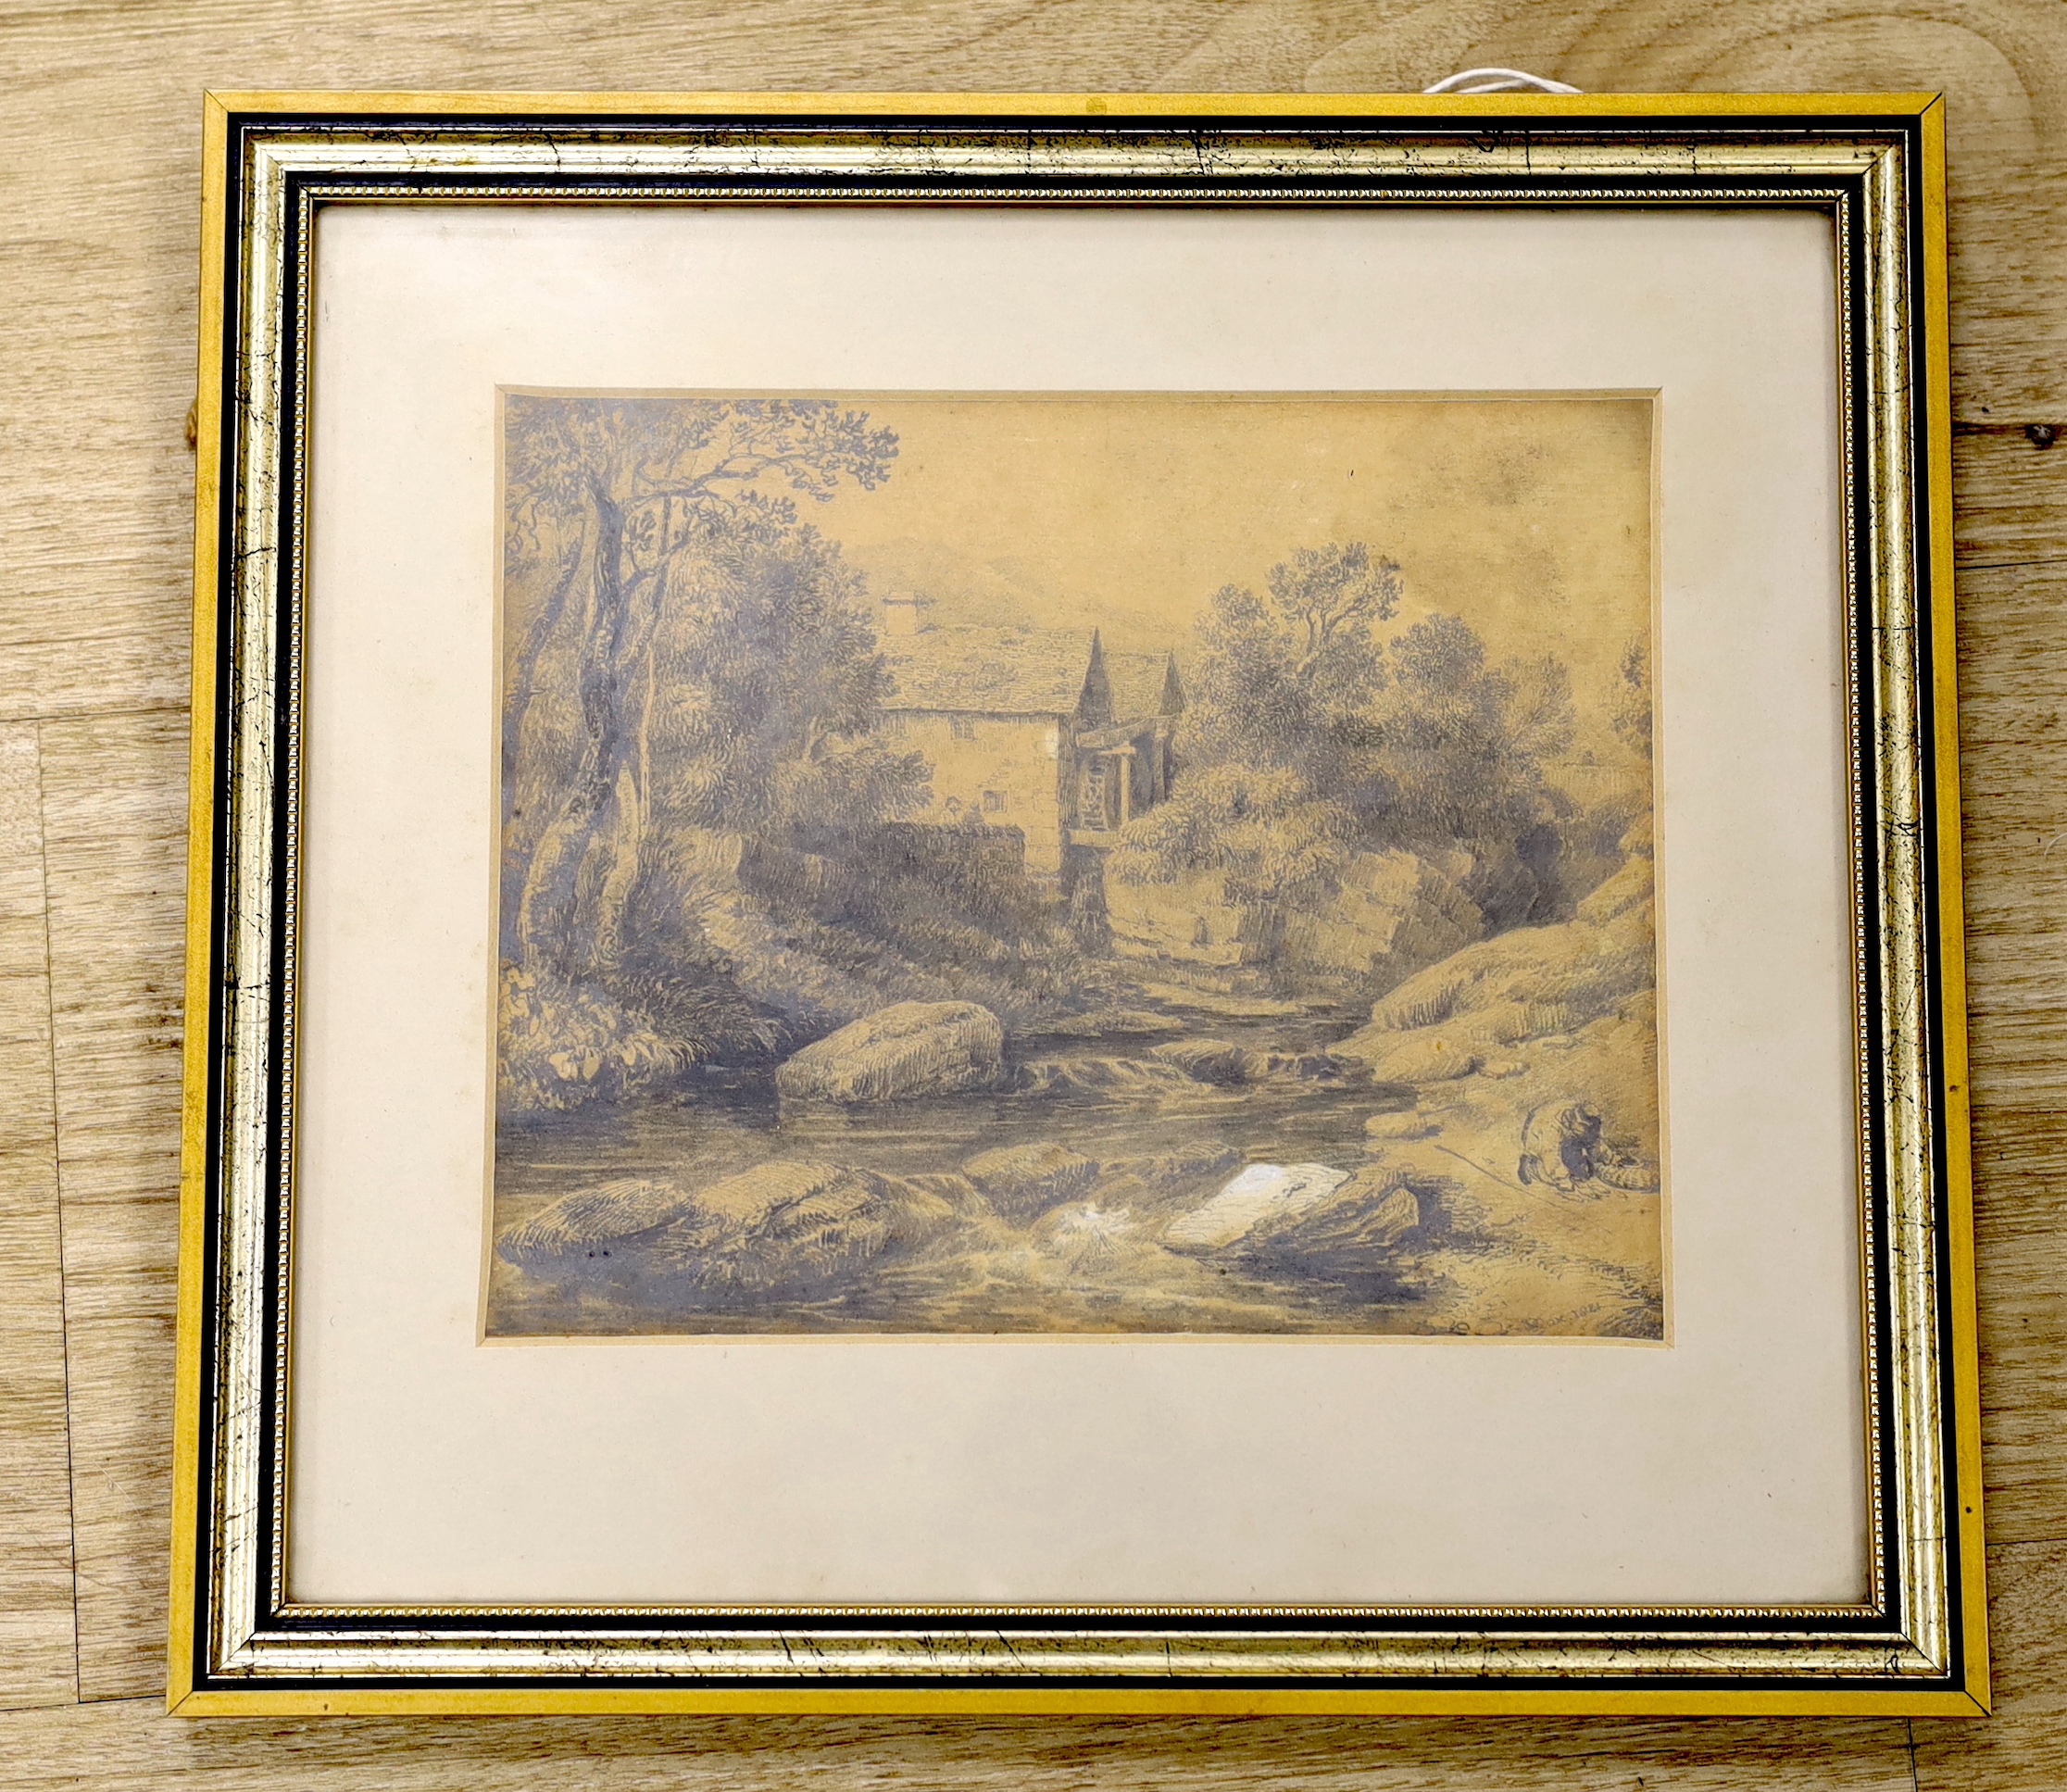 David Cox Jr. (1809-1885), pencil drawing, Figure before a watermill, signed and dated 1821, 17 x 21cm